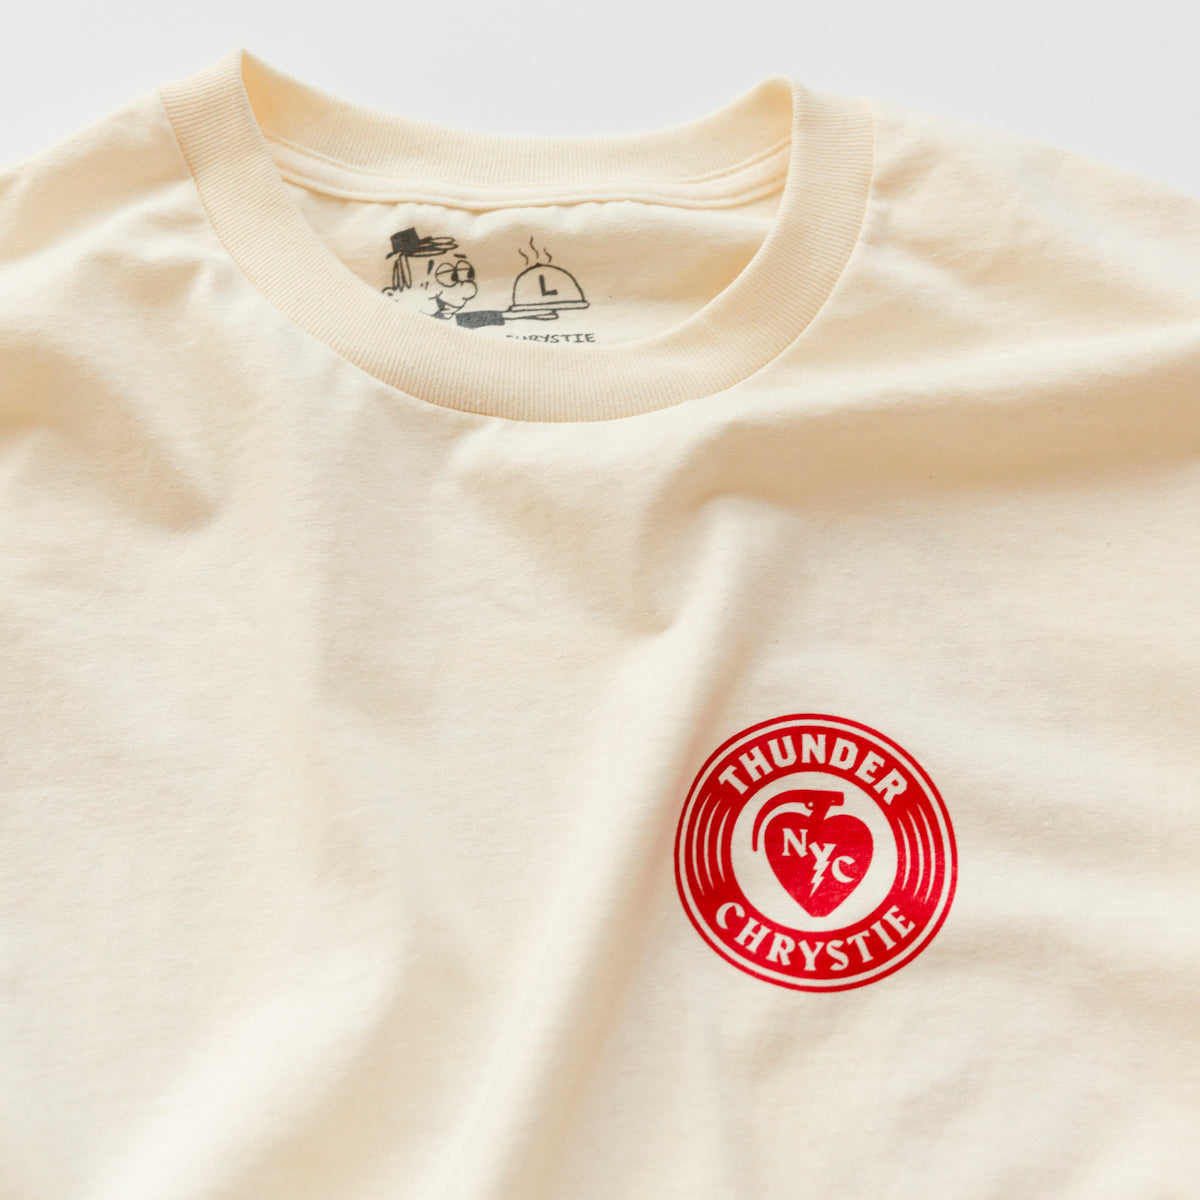 Load image into Gallery viewer, Chrystie x Thunder Circle logo Tee BONE